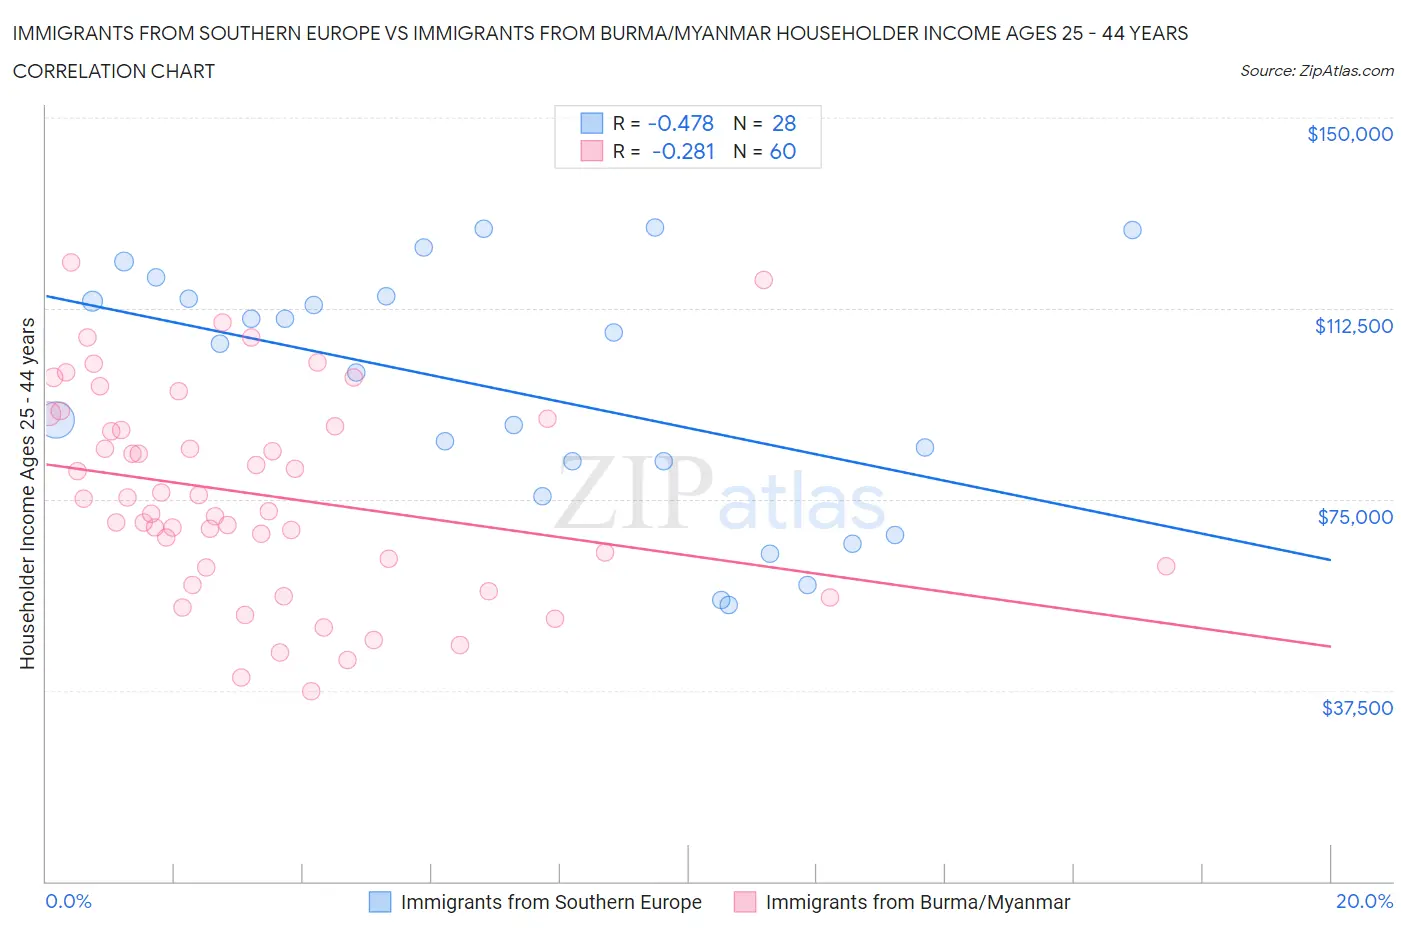 Immigrants from Southern Europe vs Immigrants from Burma/Myanmar Householder Income Ages 25 - 44 years